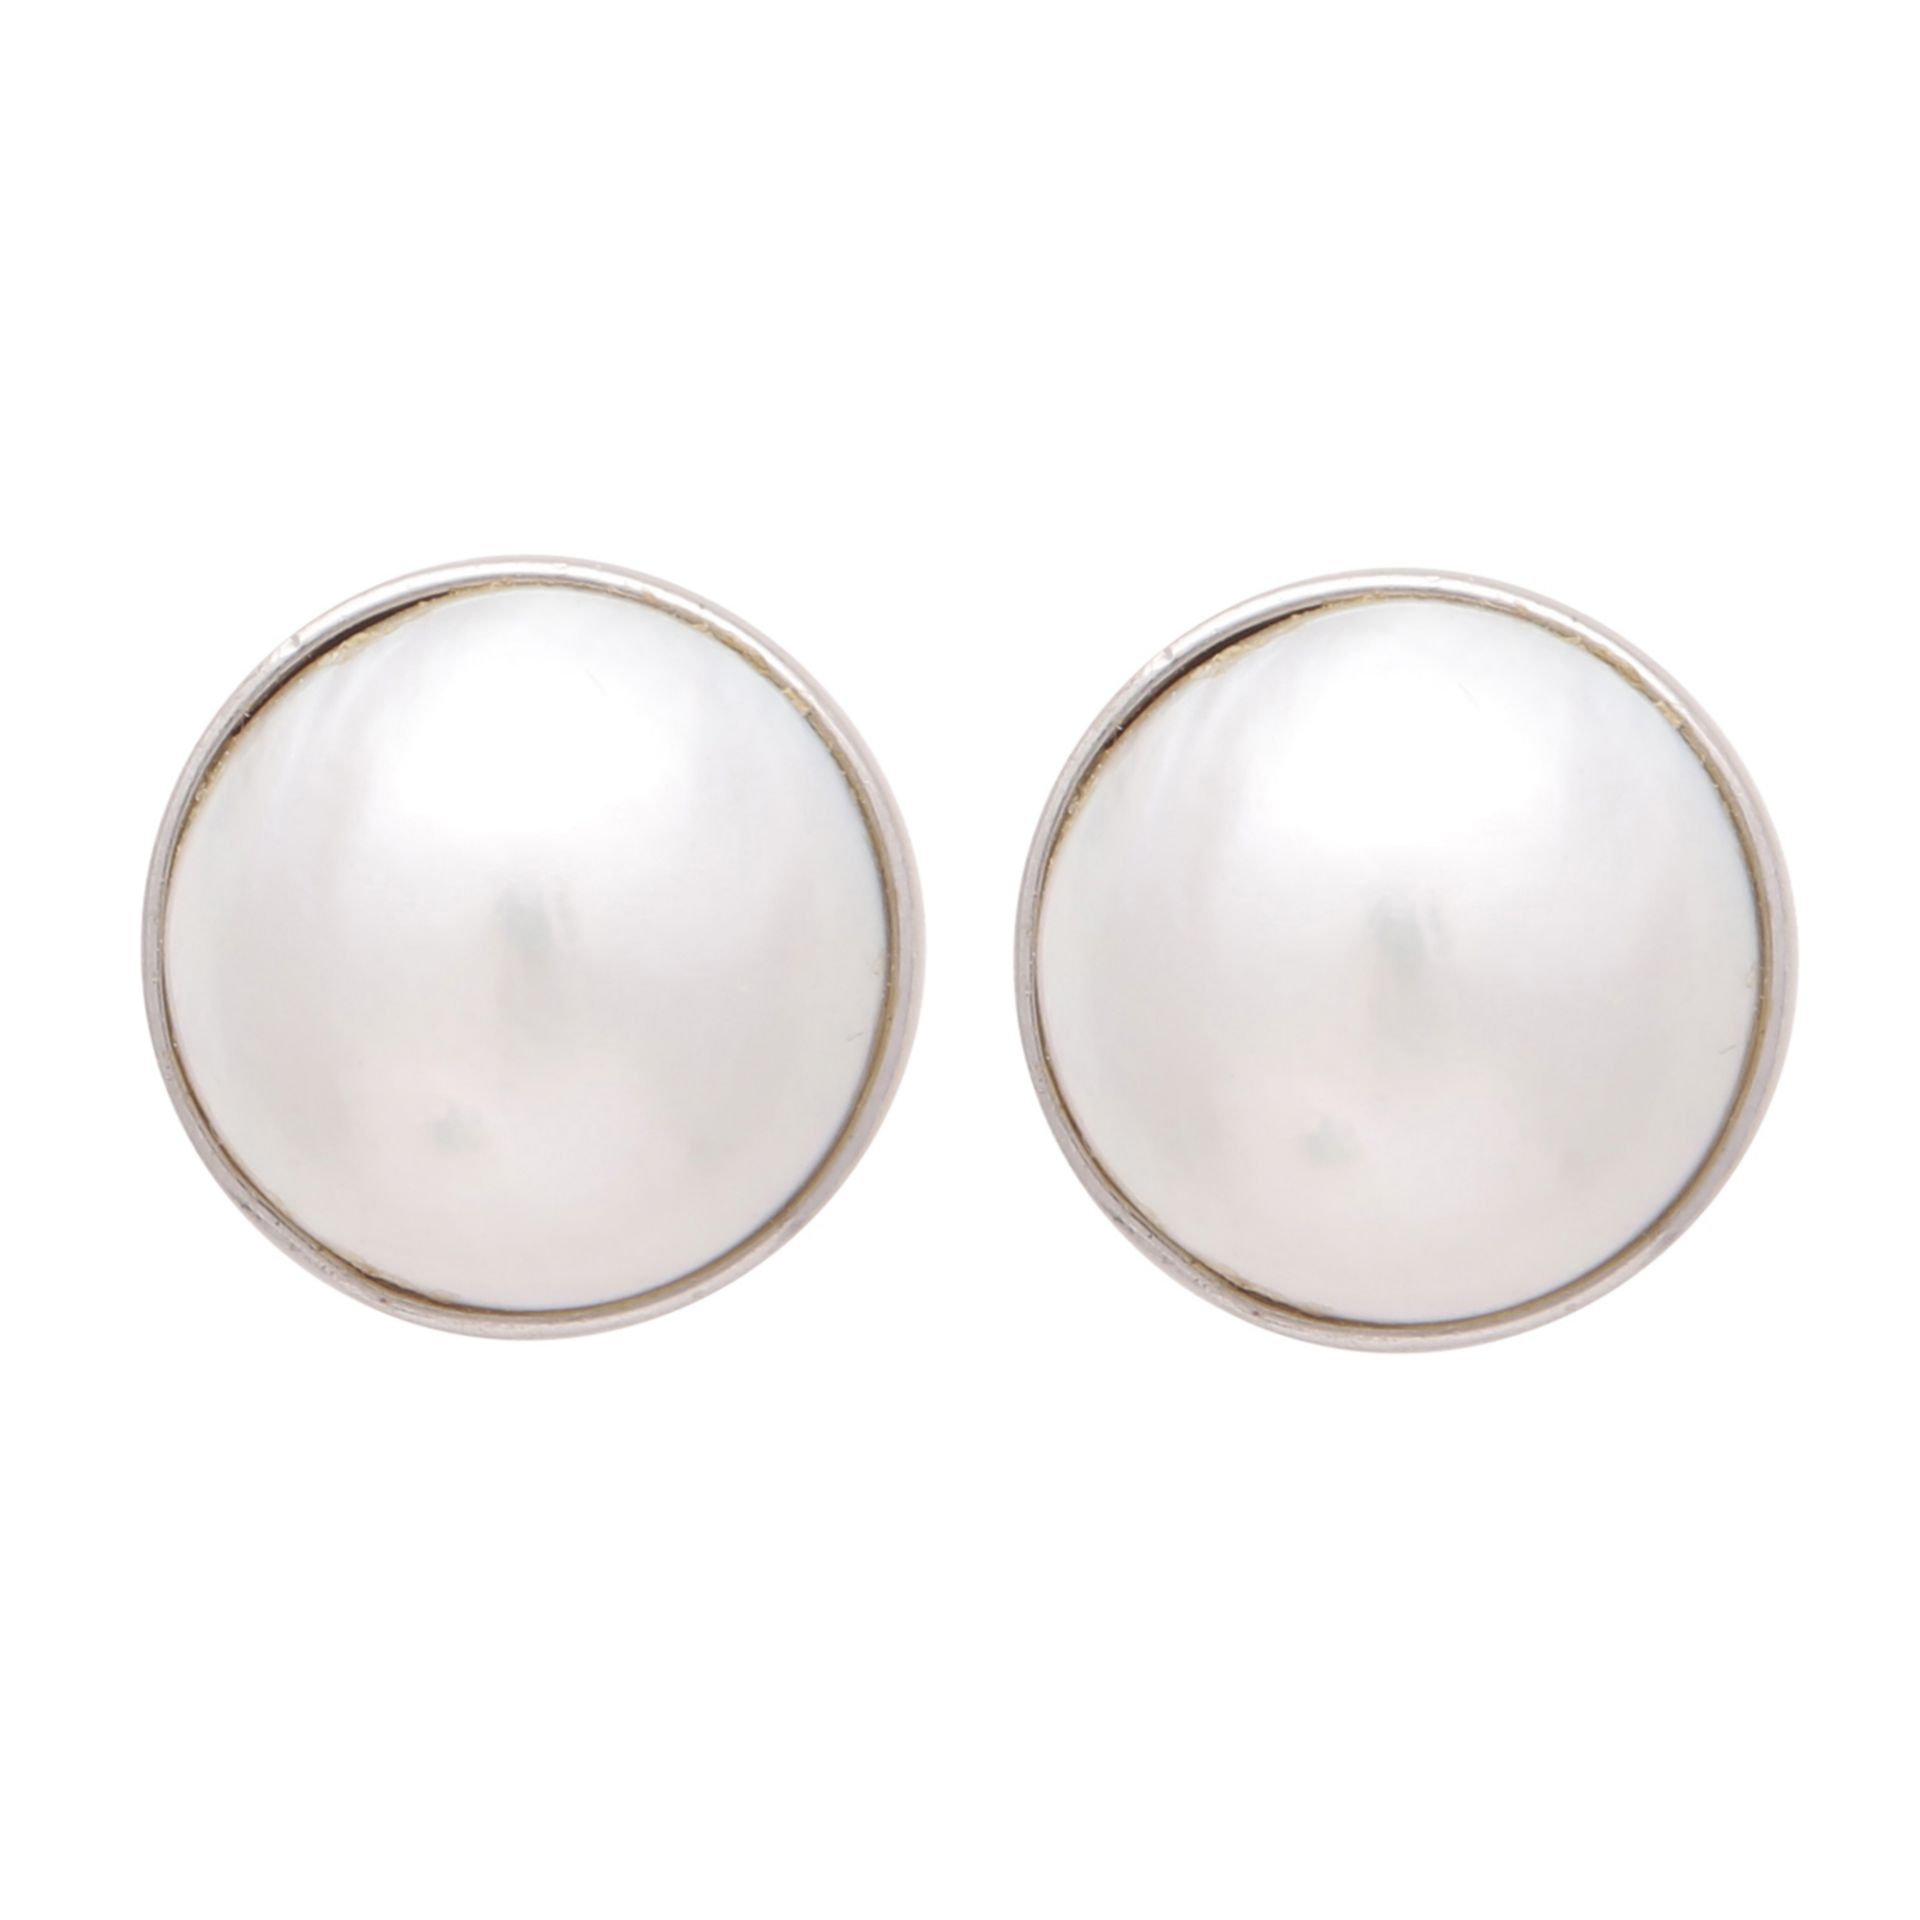 A pair of mabe pearl stud earrings set in 14ct white gold, each designed as a single, round mabe